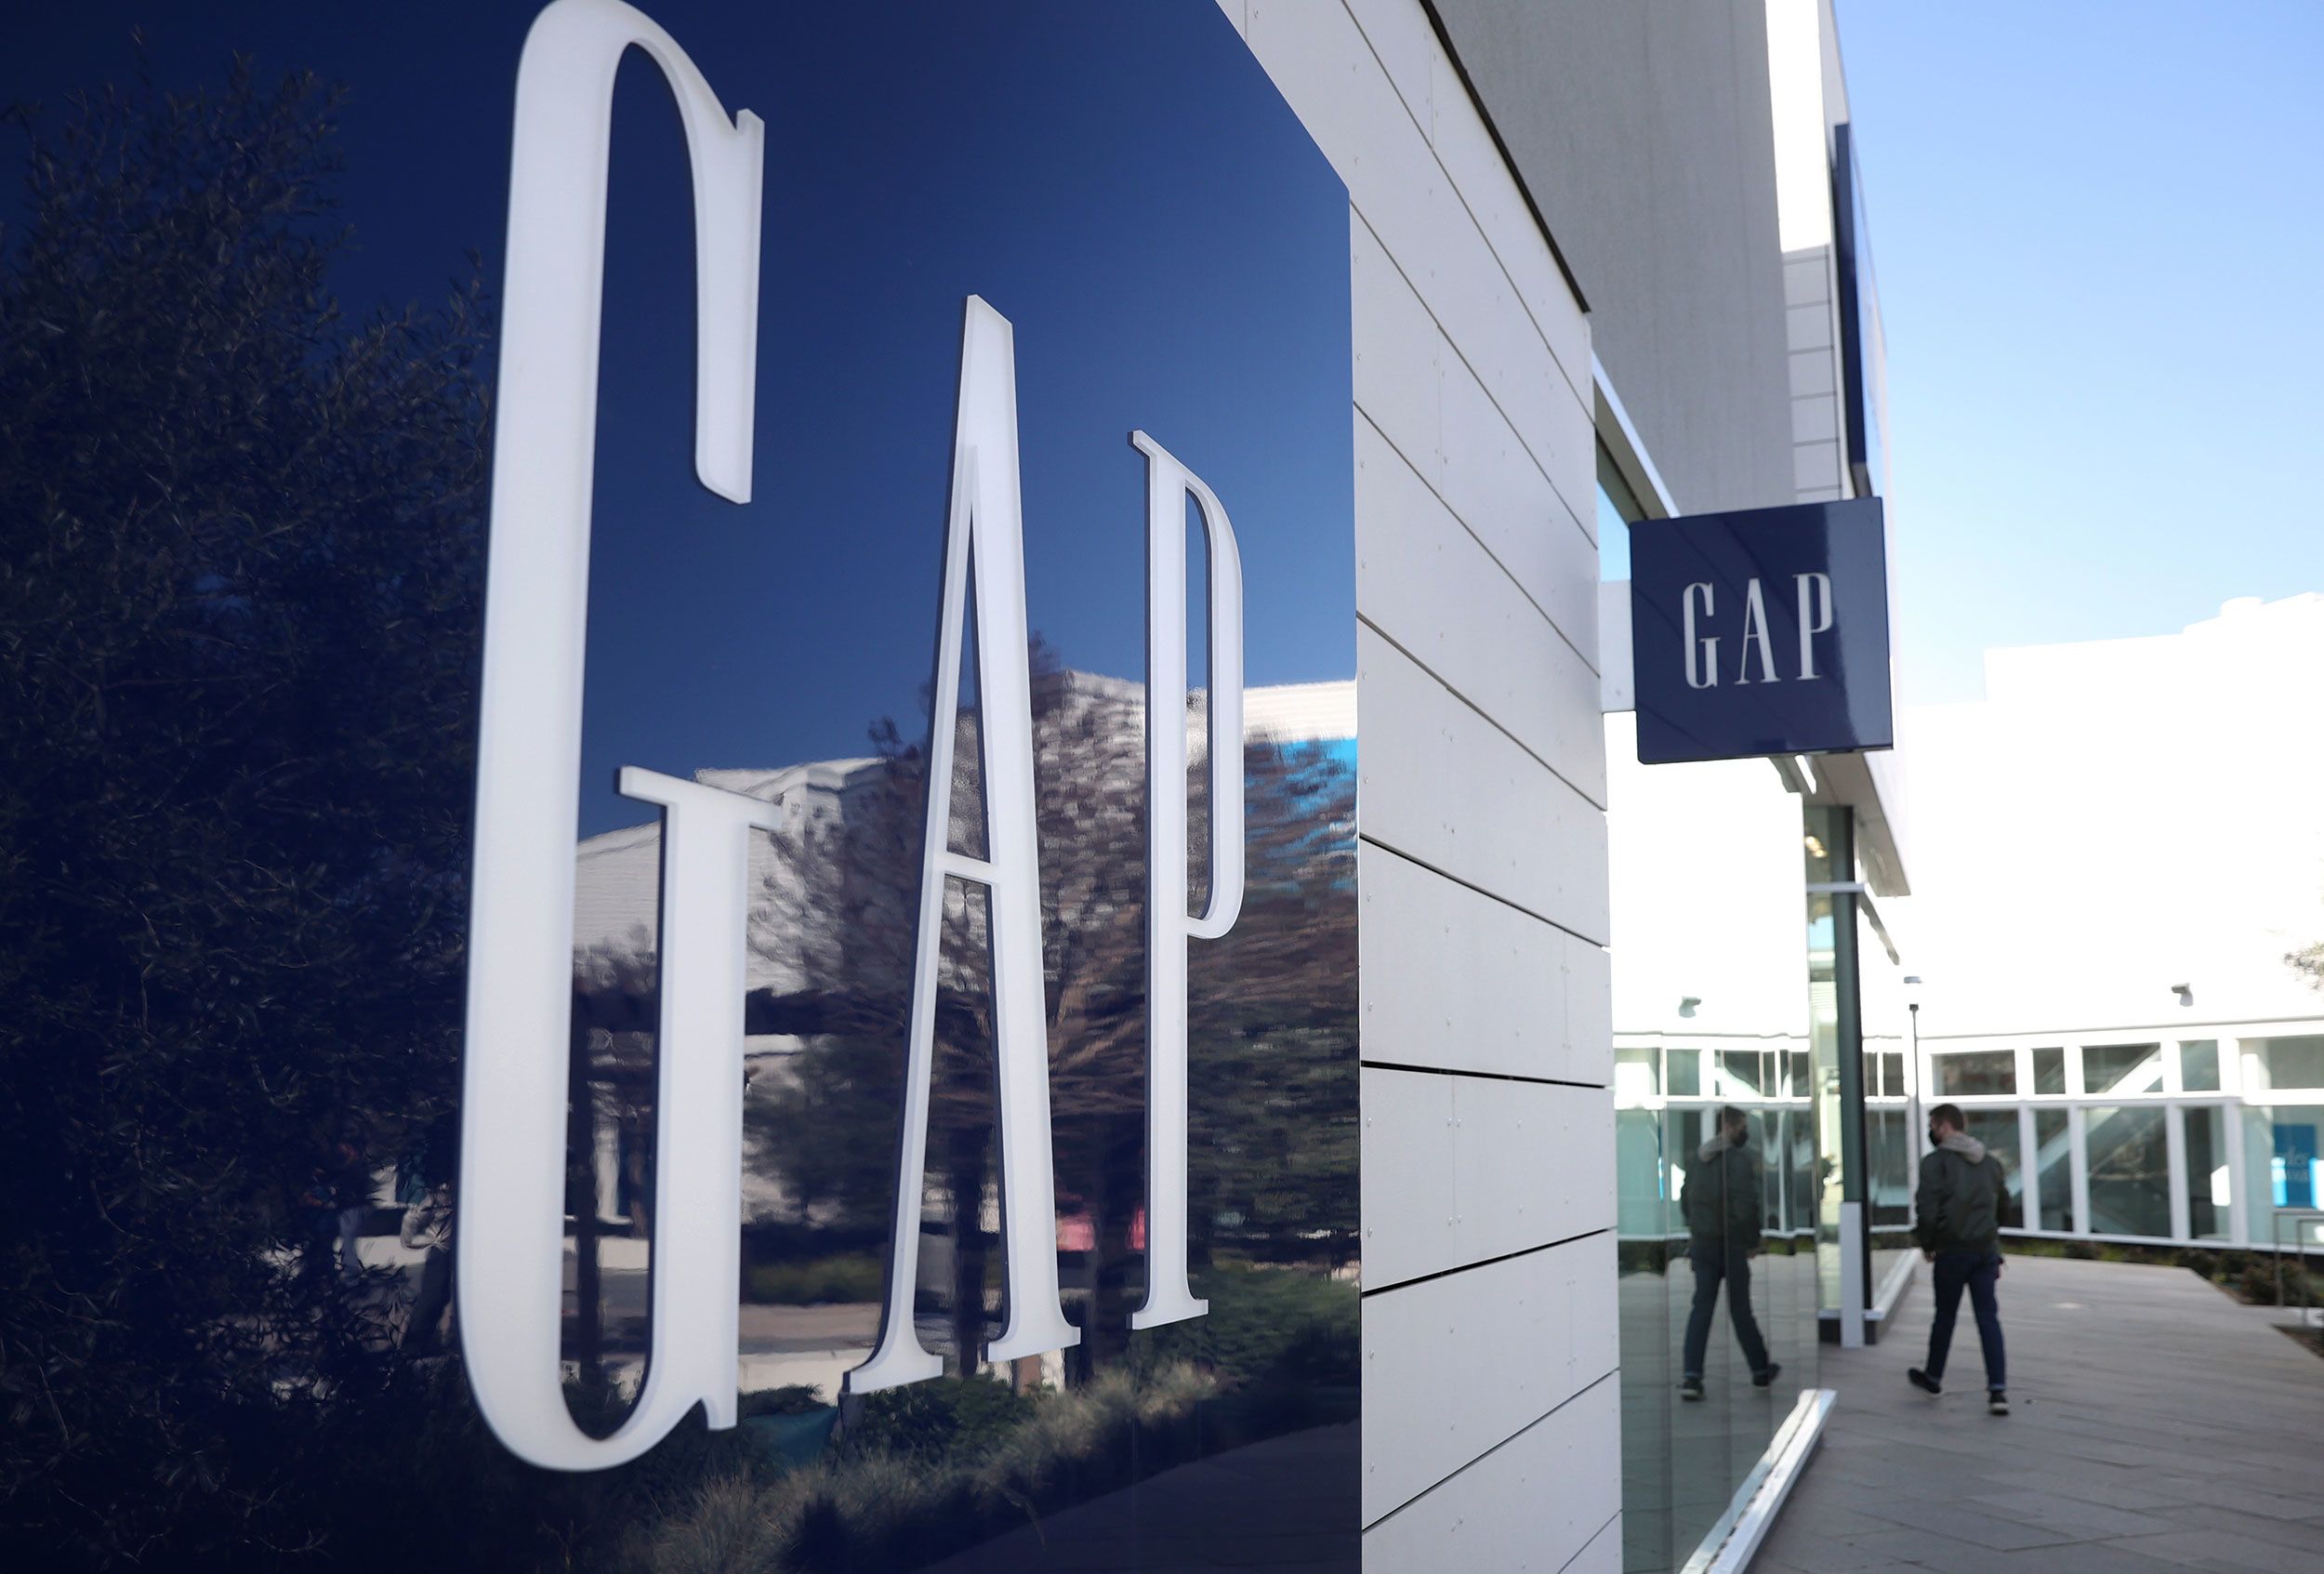 Gap Inc sees double-digit sales growth for some of its brands